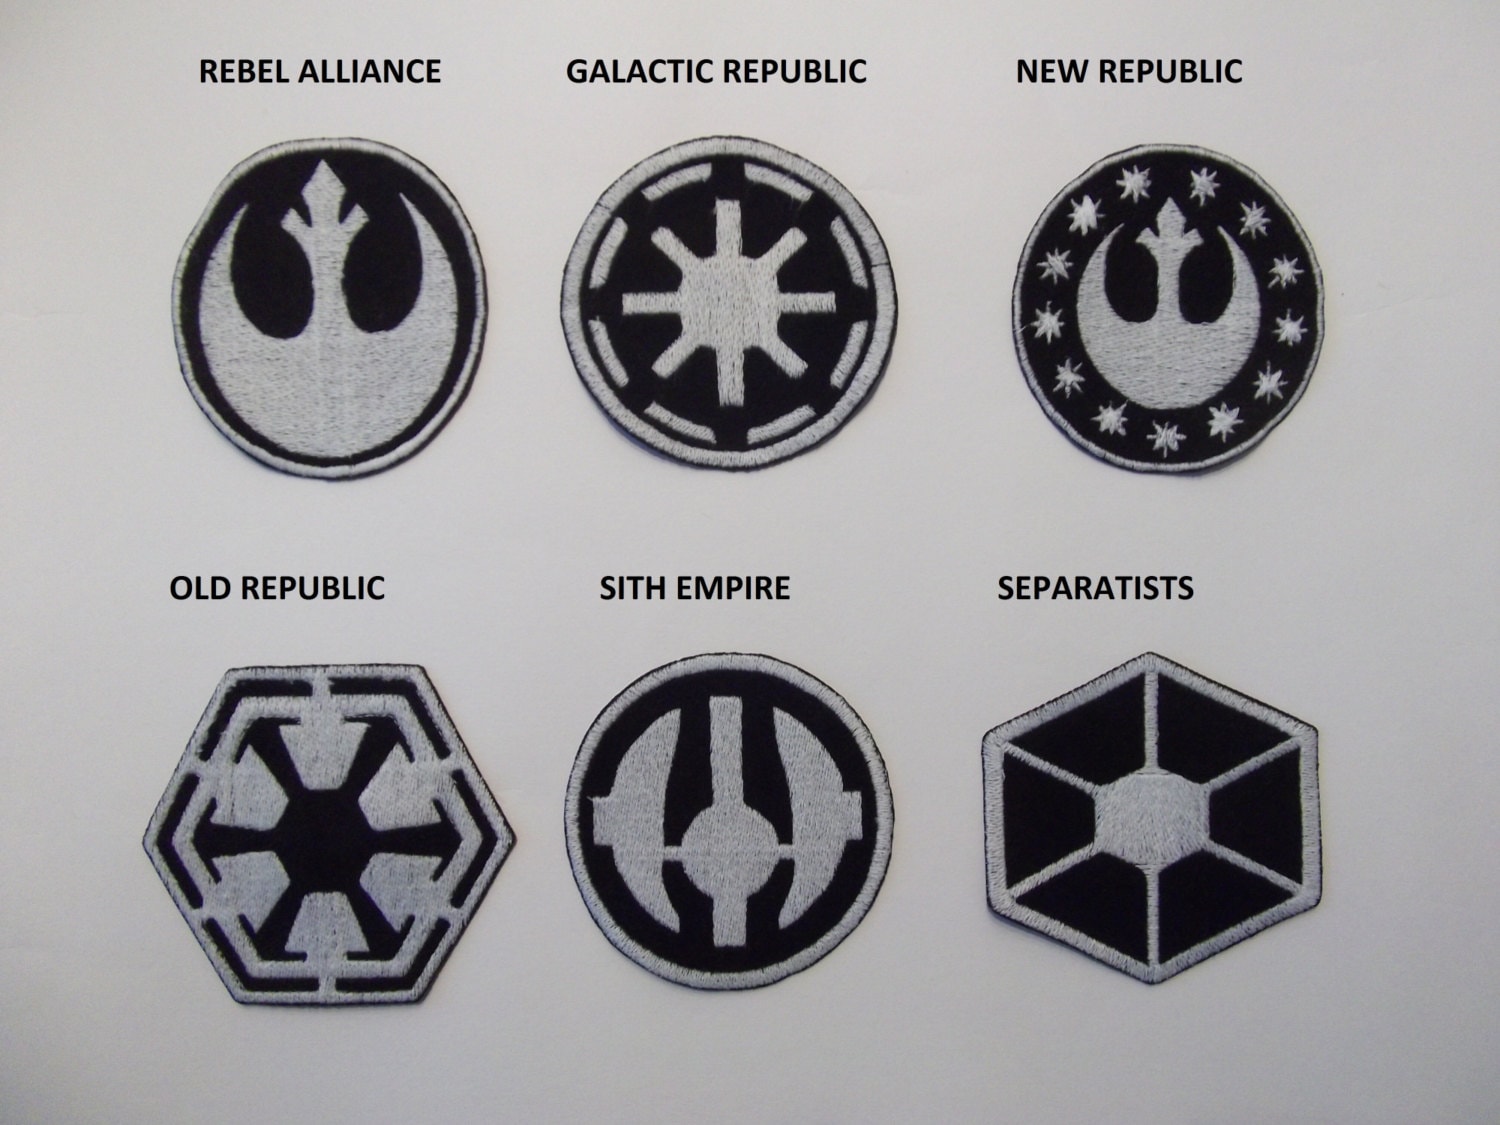 Star Wars Galaxy Round Patch, Rebel Alliance Logo, Embroidered Iron On,  Size: 3.5 inches